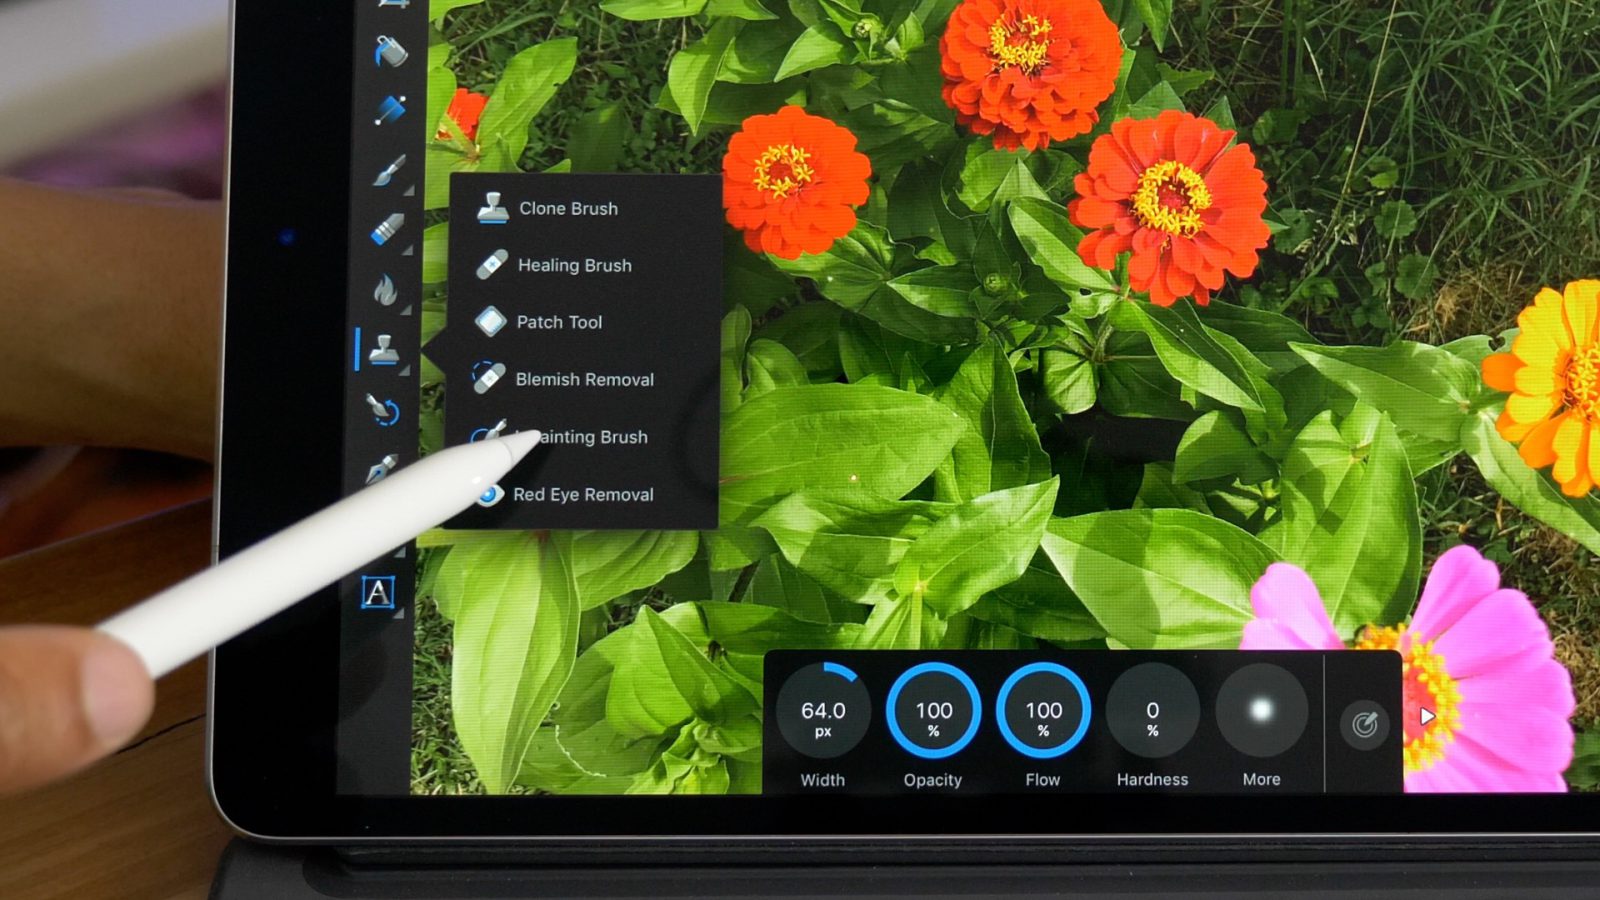 Affinity Photo Updated With Native Support For 10.5-inch ...